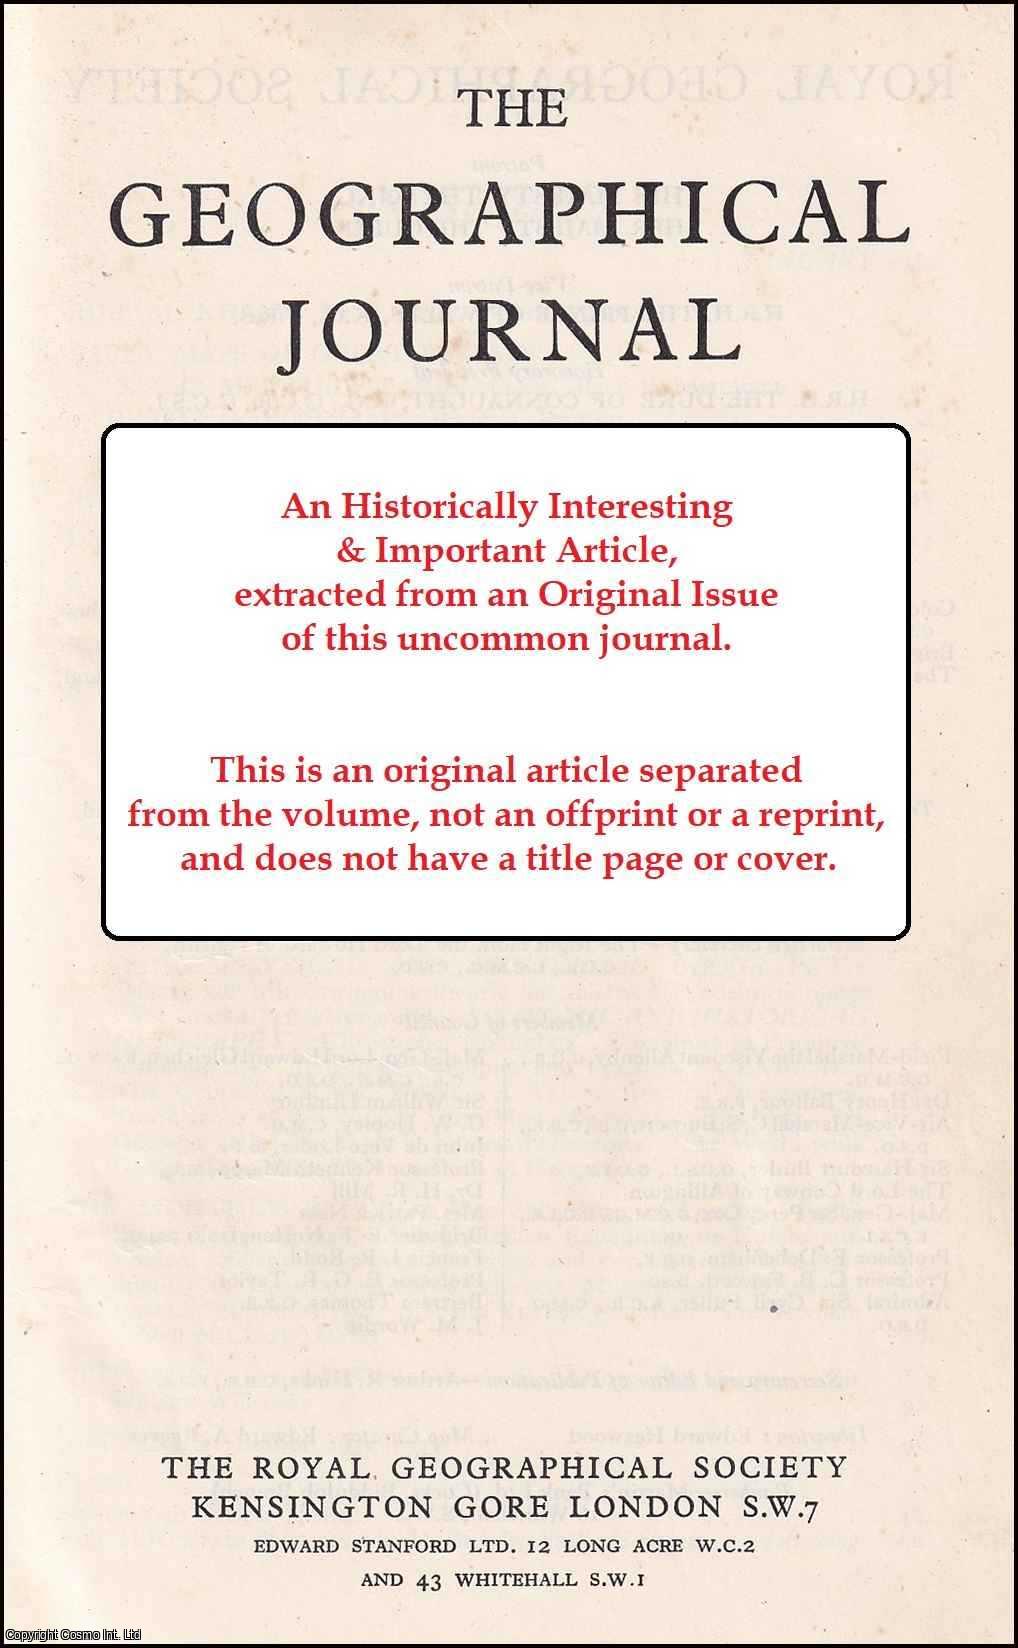 J. Valerie Fifer - Transcontinental: The Political Word. An original article from the Geographical Journal, 1978.